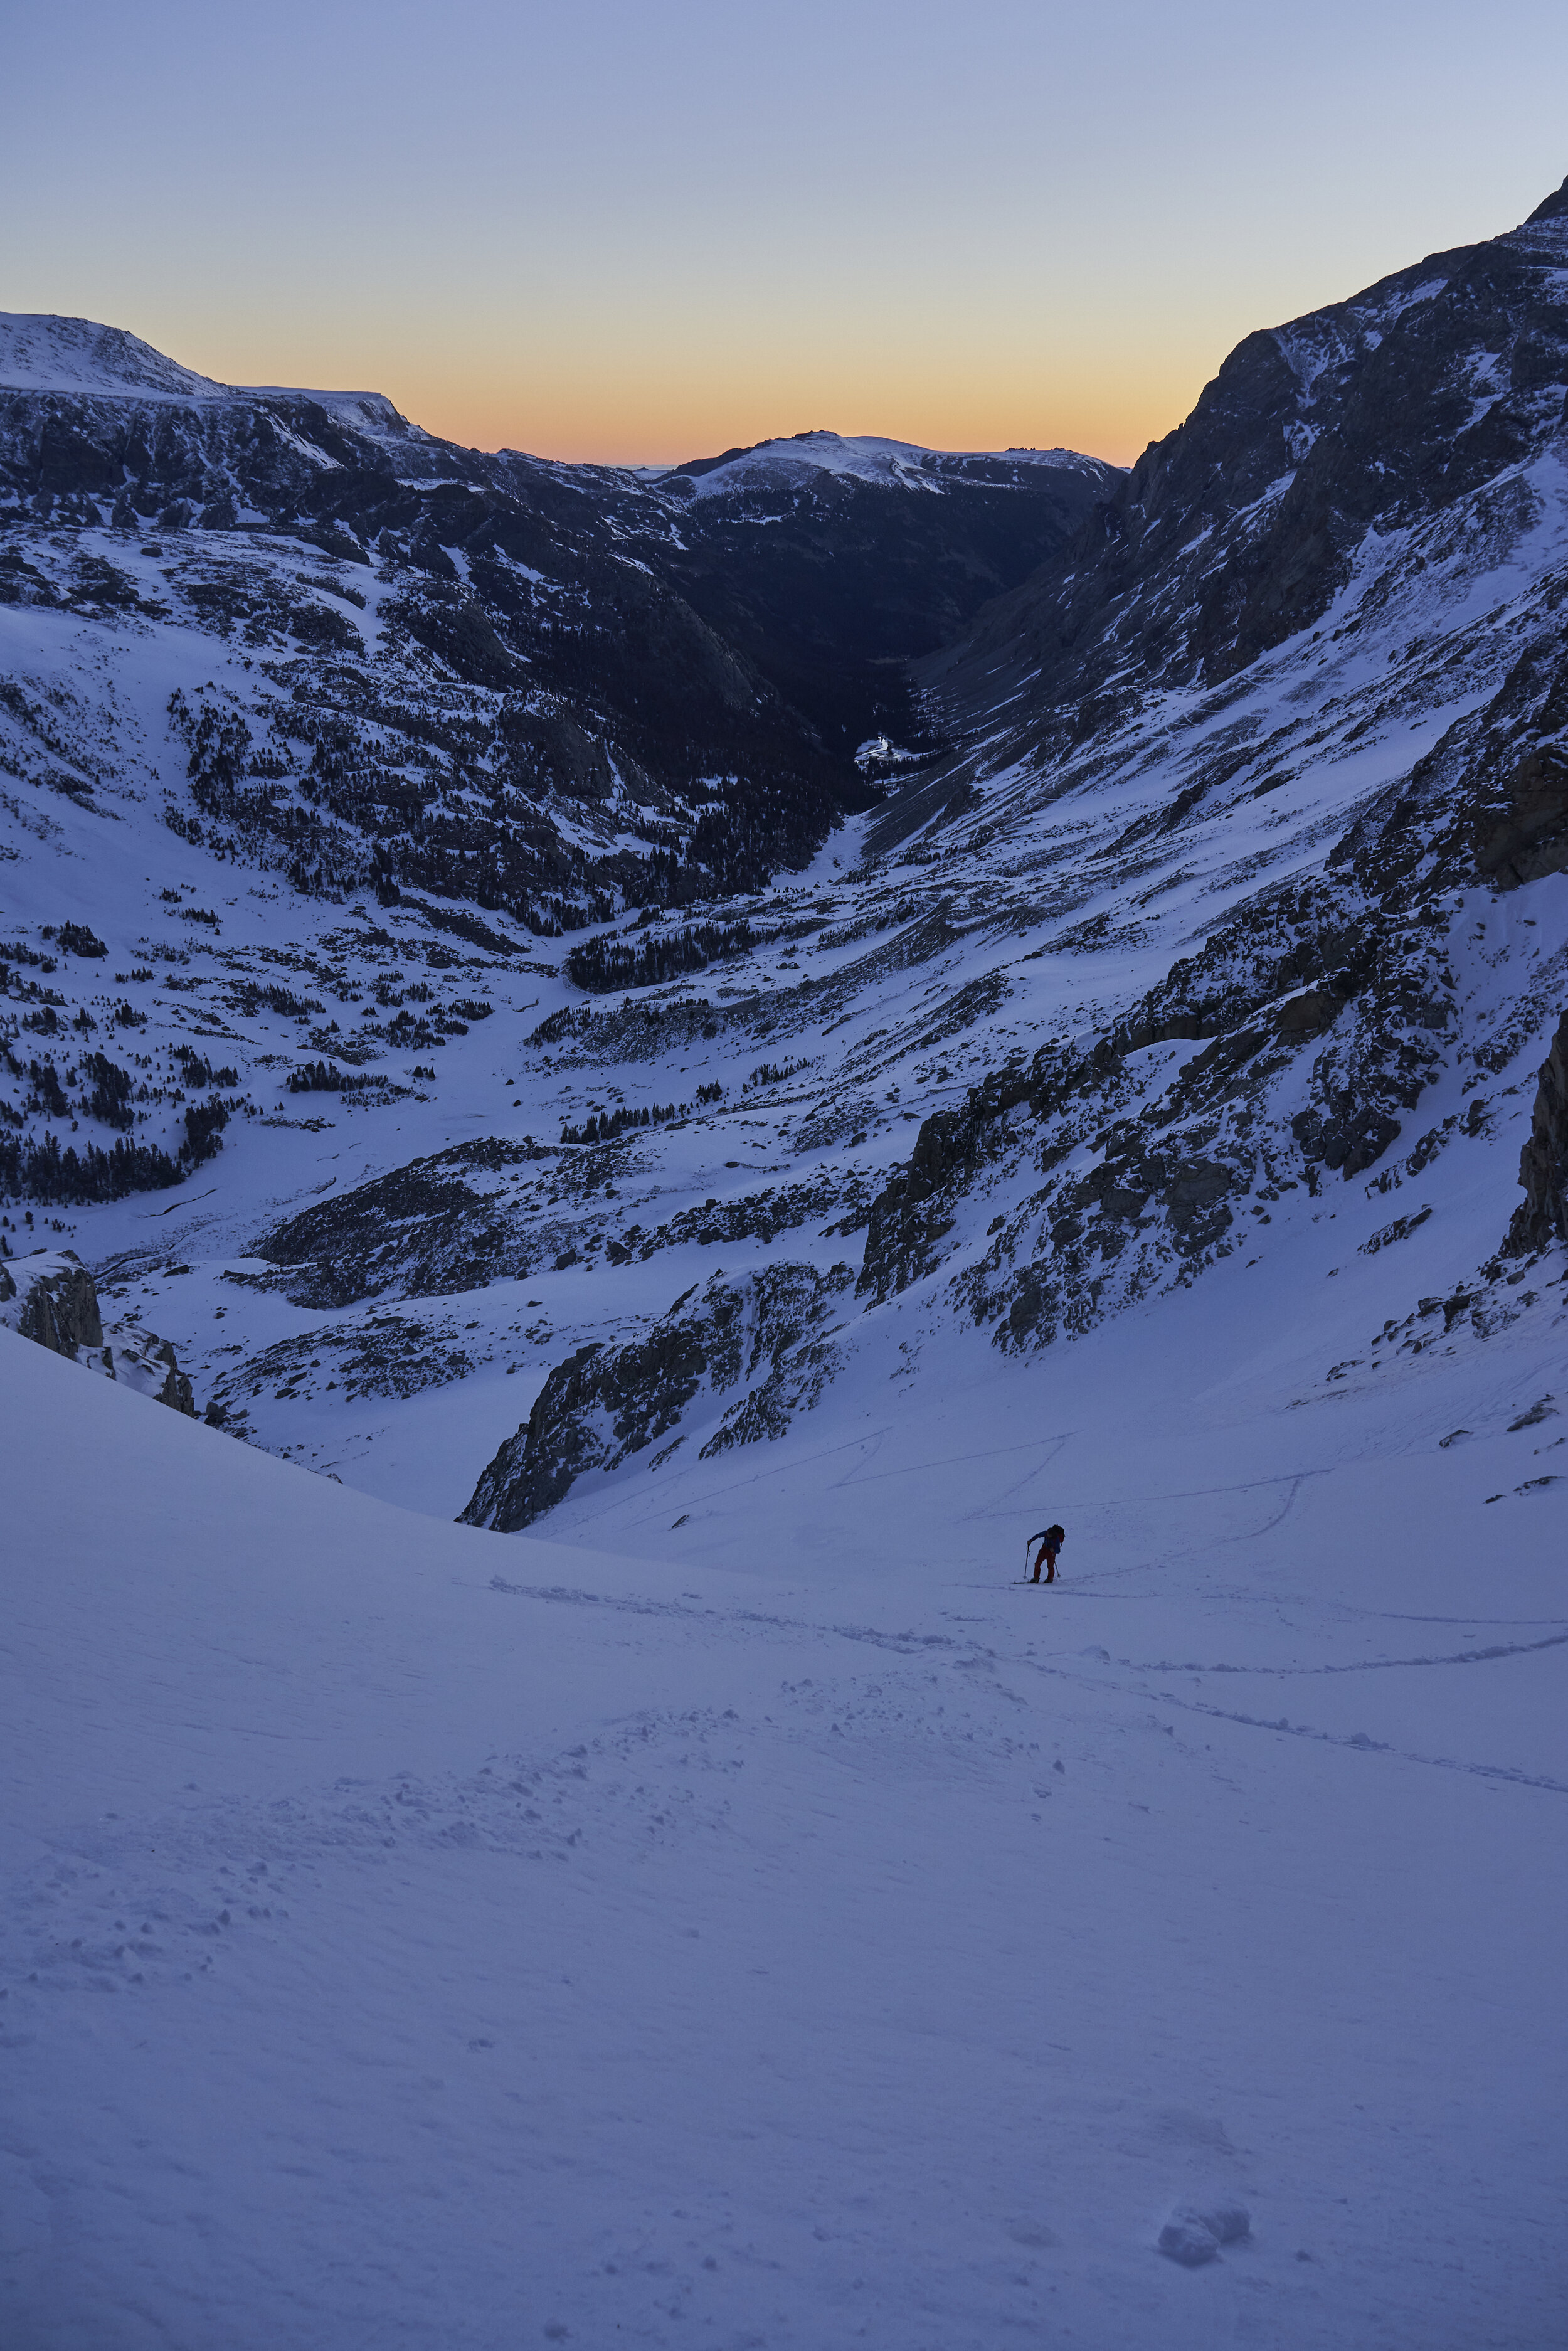 Skinning up the North Couloir of Whitetail